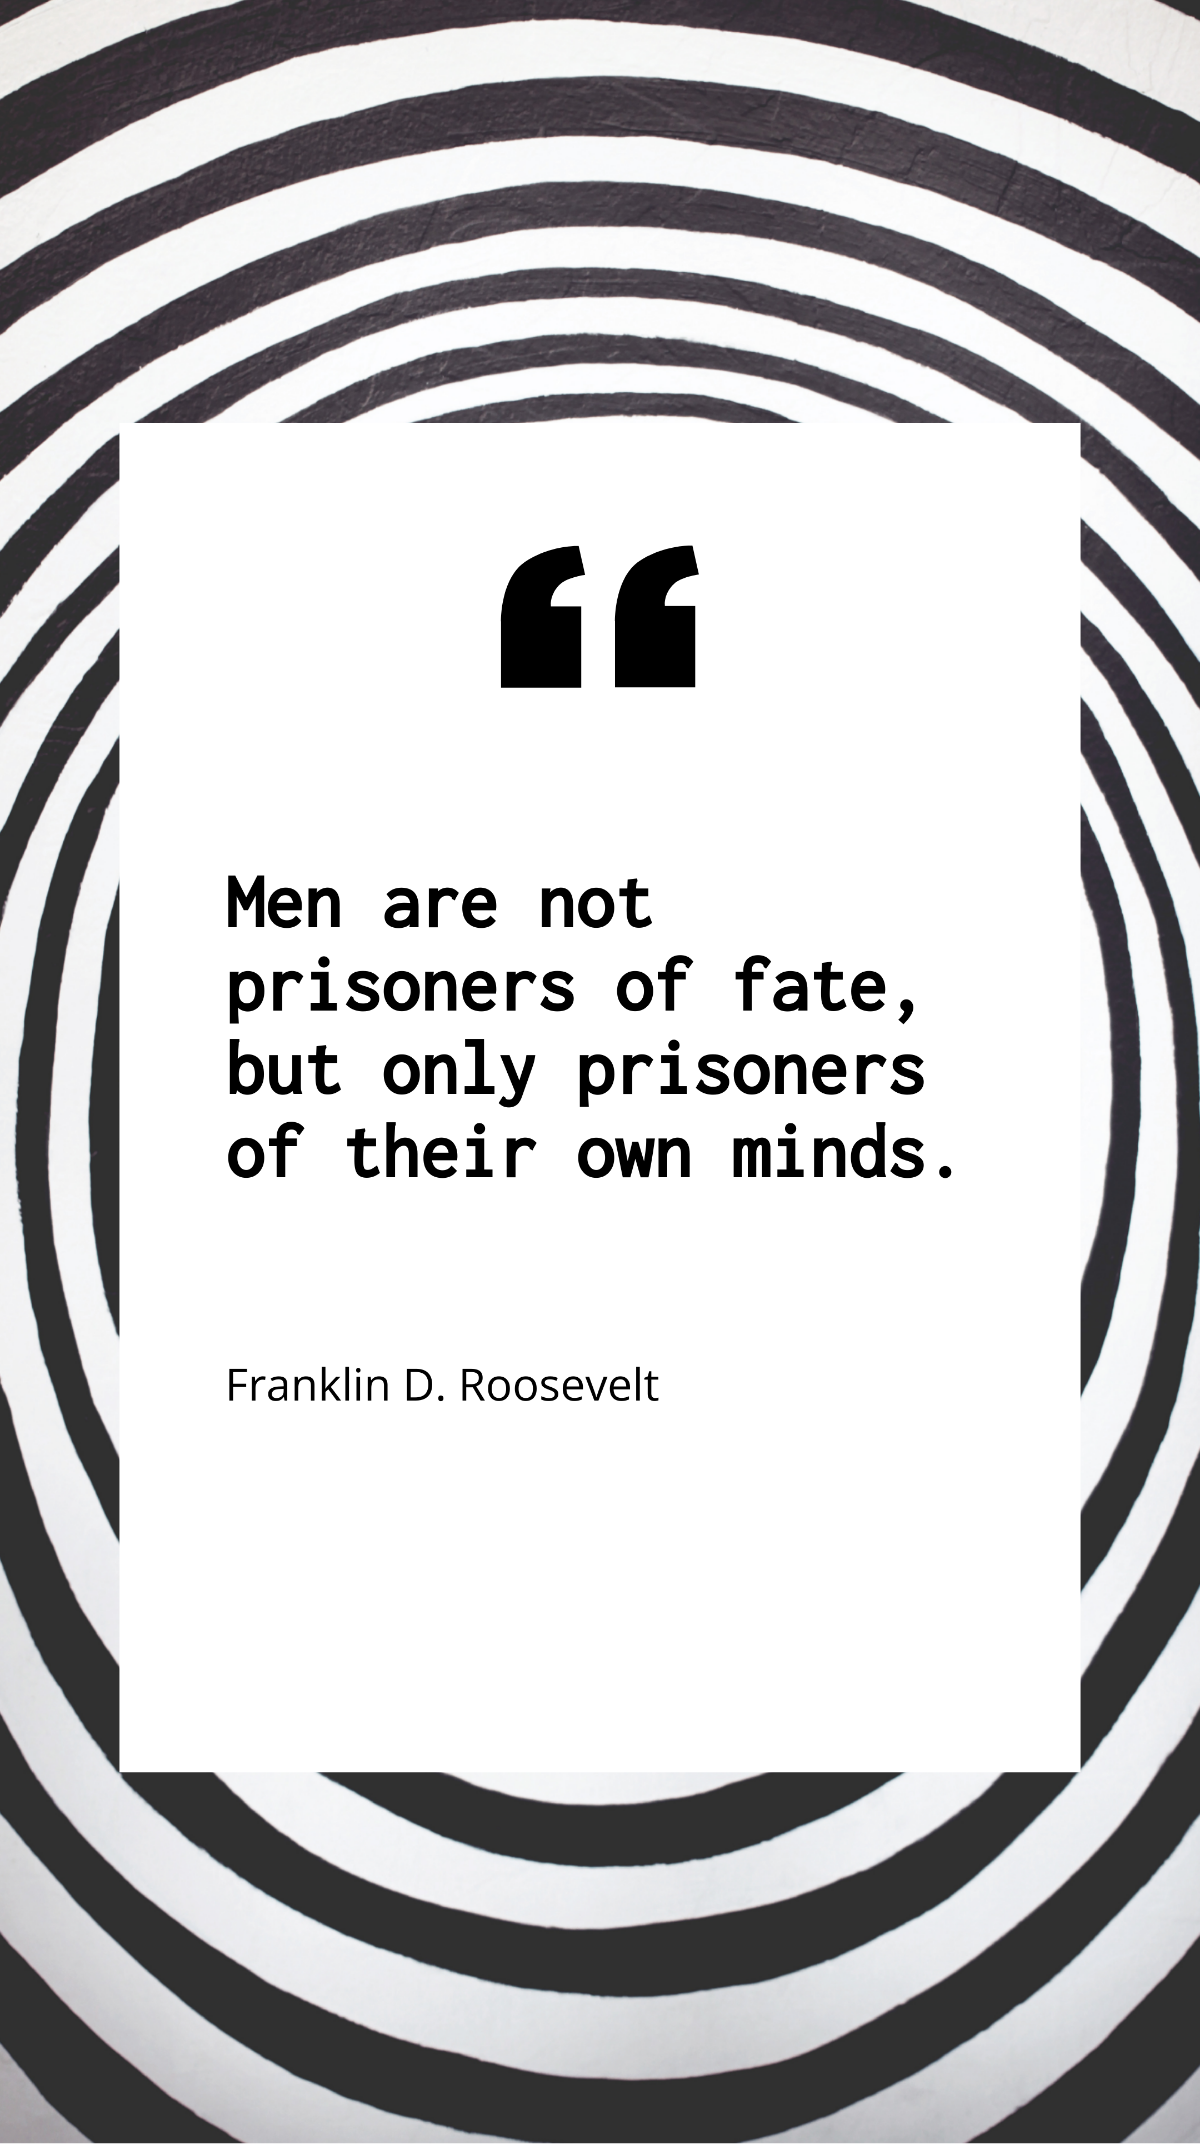 Franklin D. Roosevelt - Men are not prisoners of fate, but only prisoners of their own minds. Template